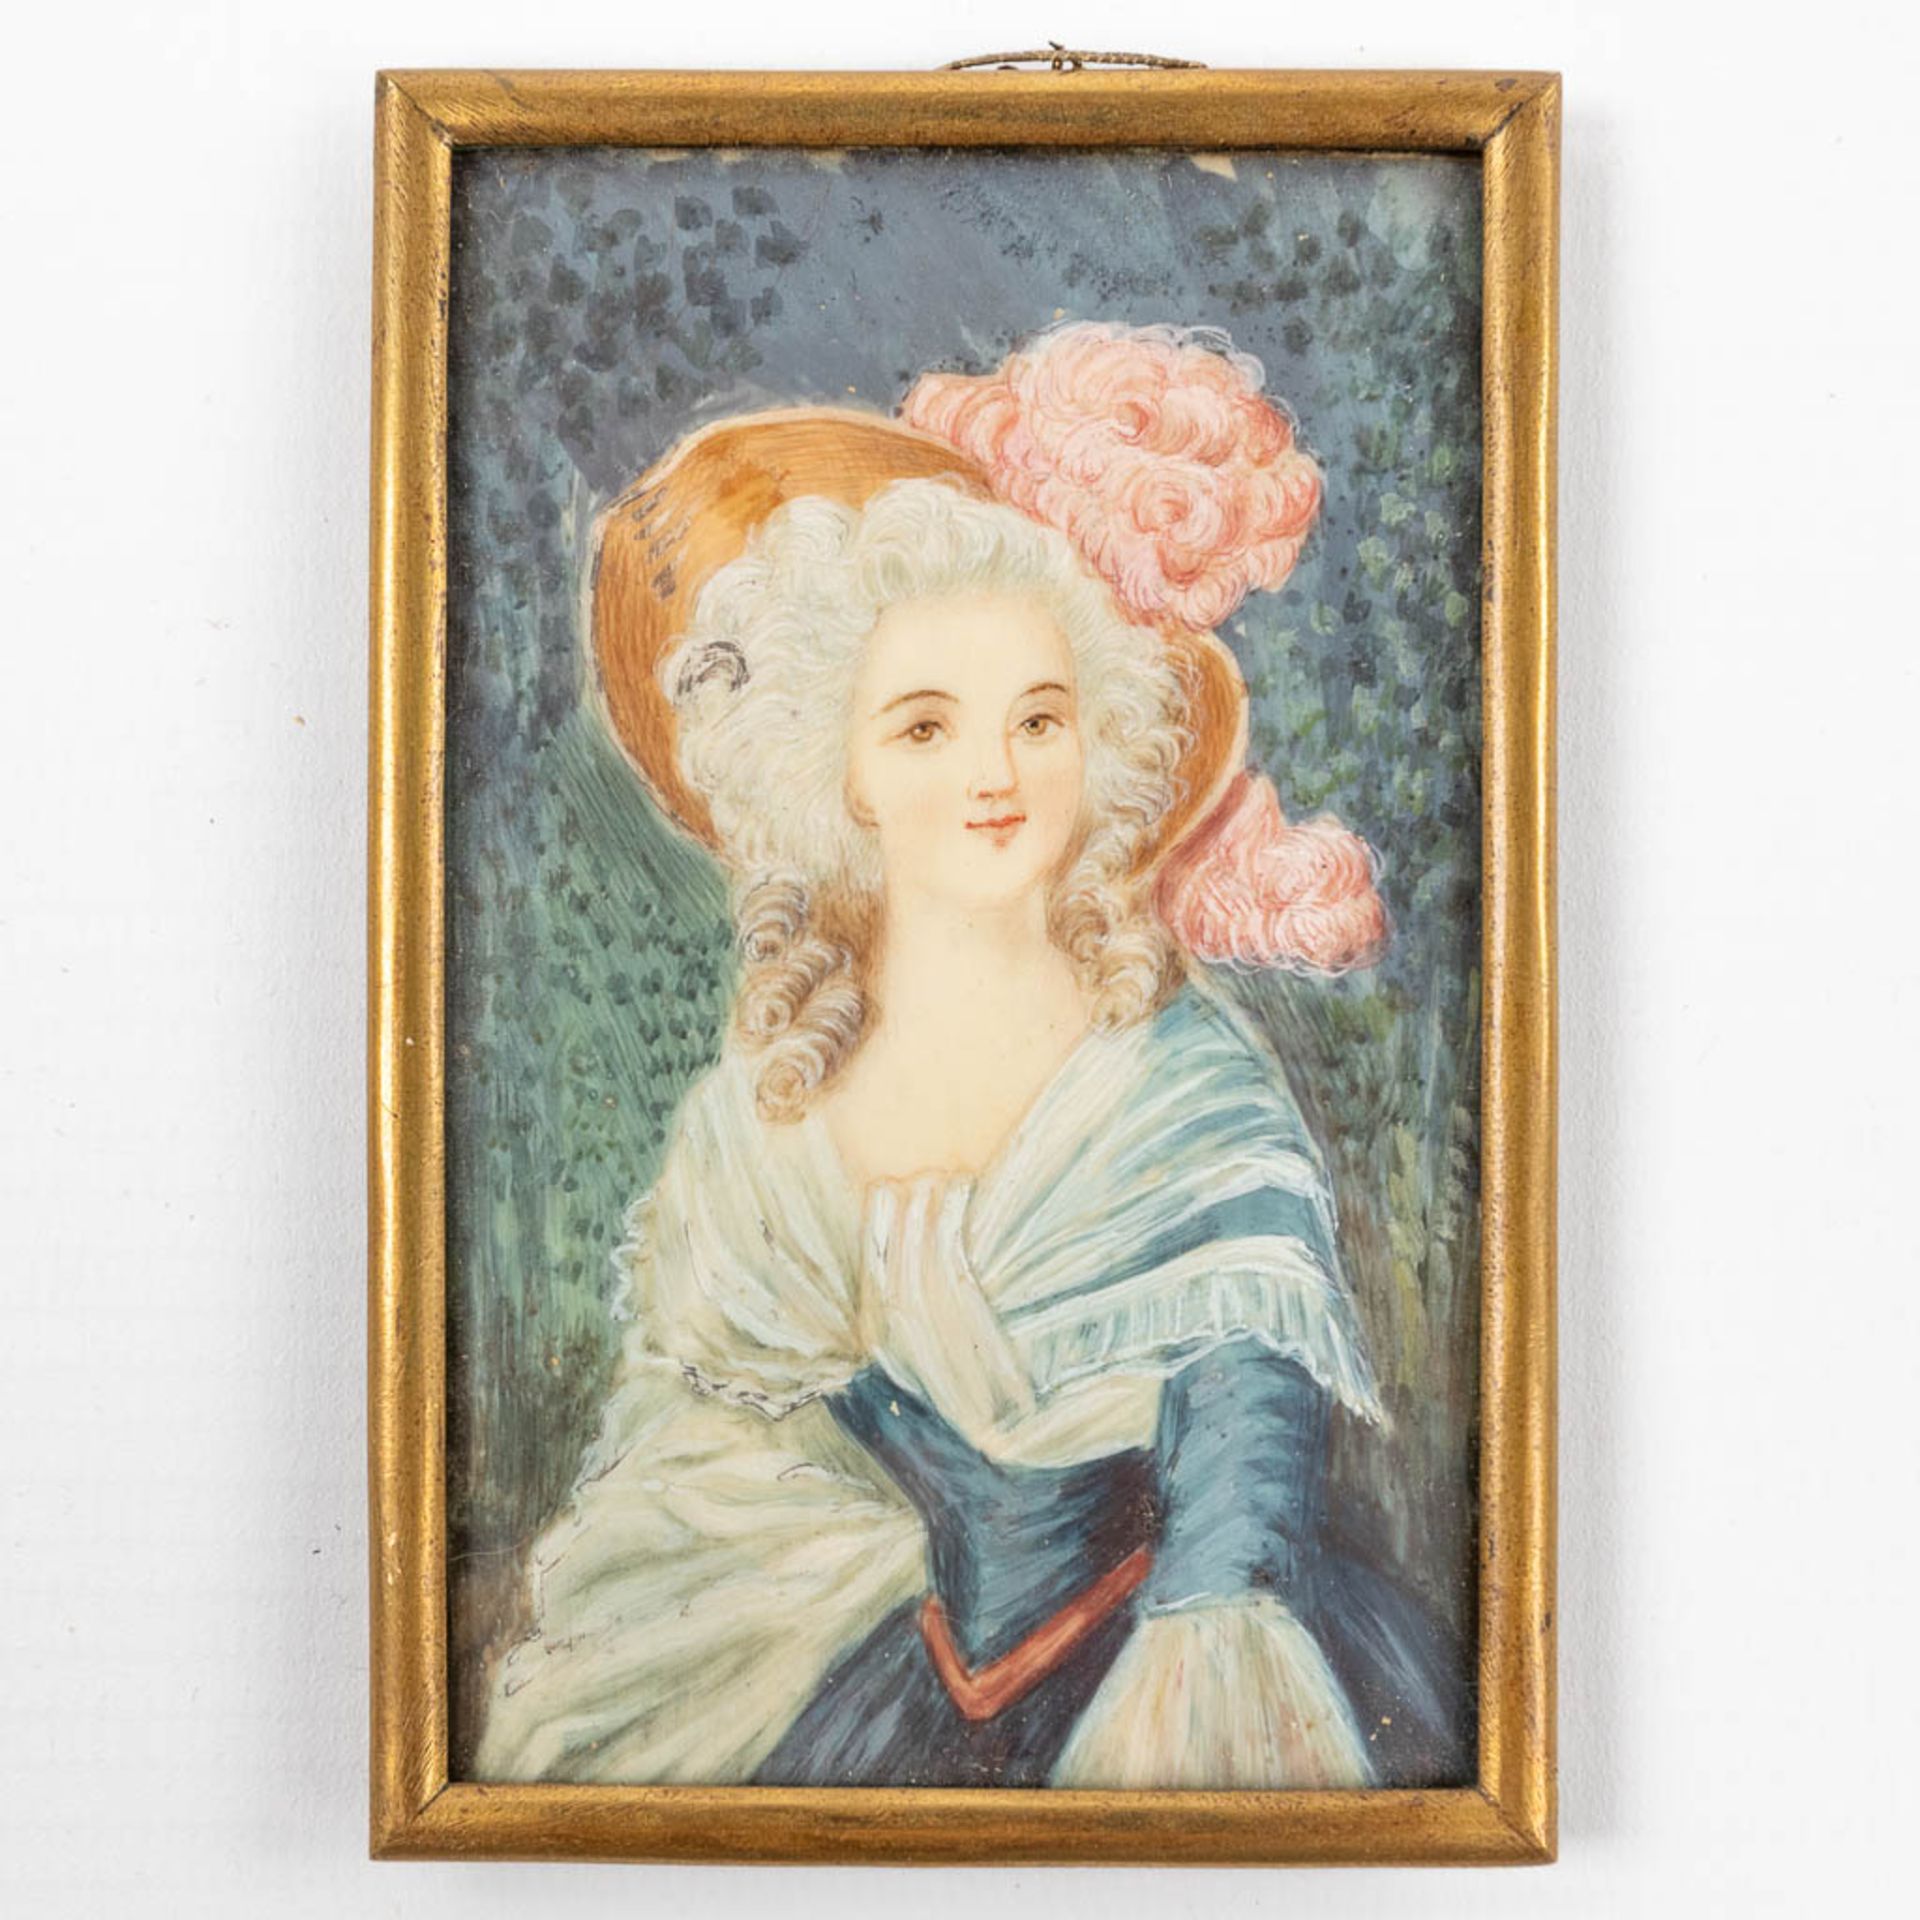 Seven miniature framed paintings, 19th C. (W:17 x H:20 cm) - Image 13 of 13